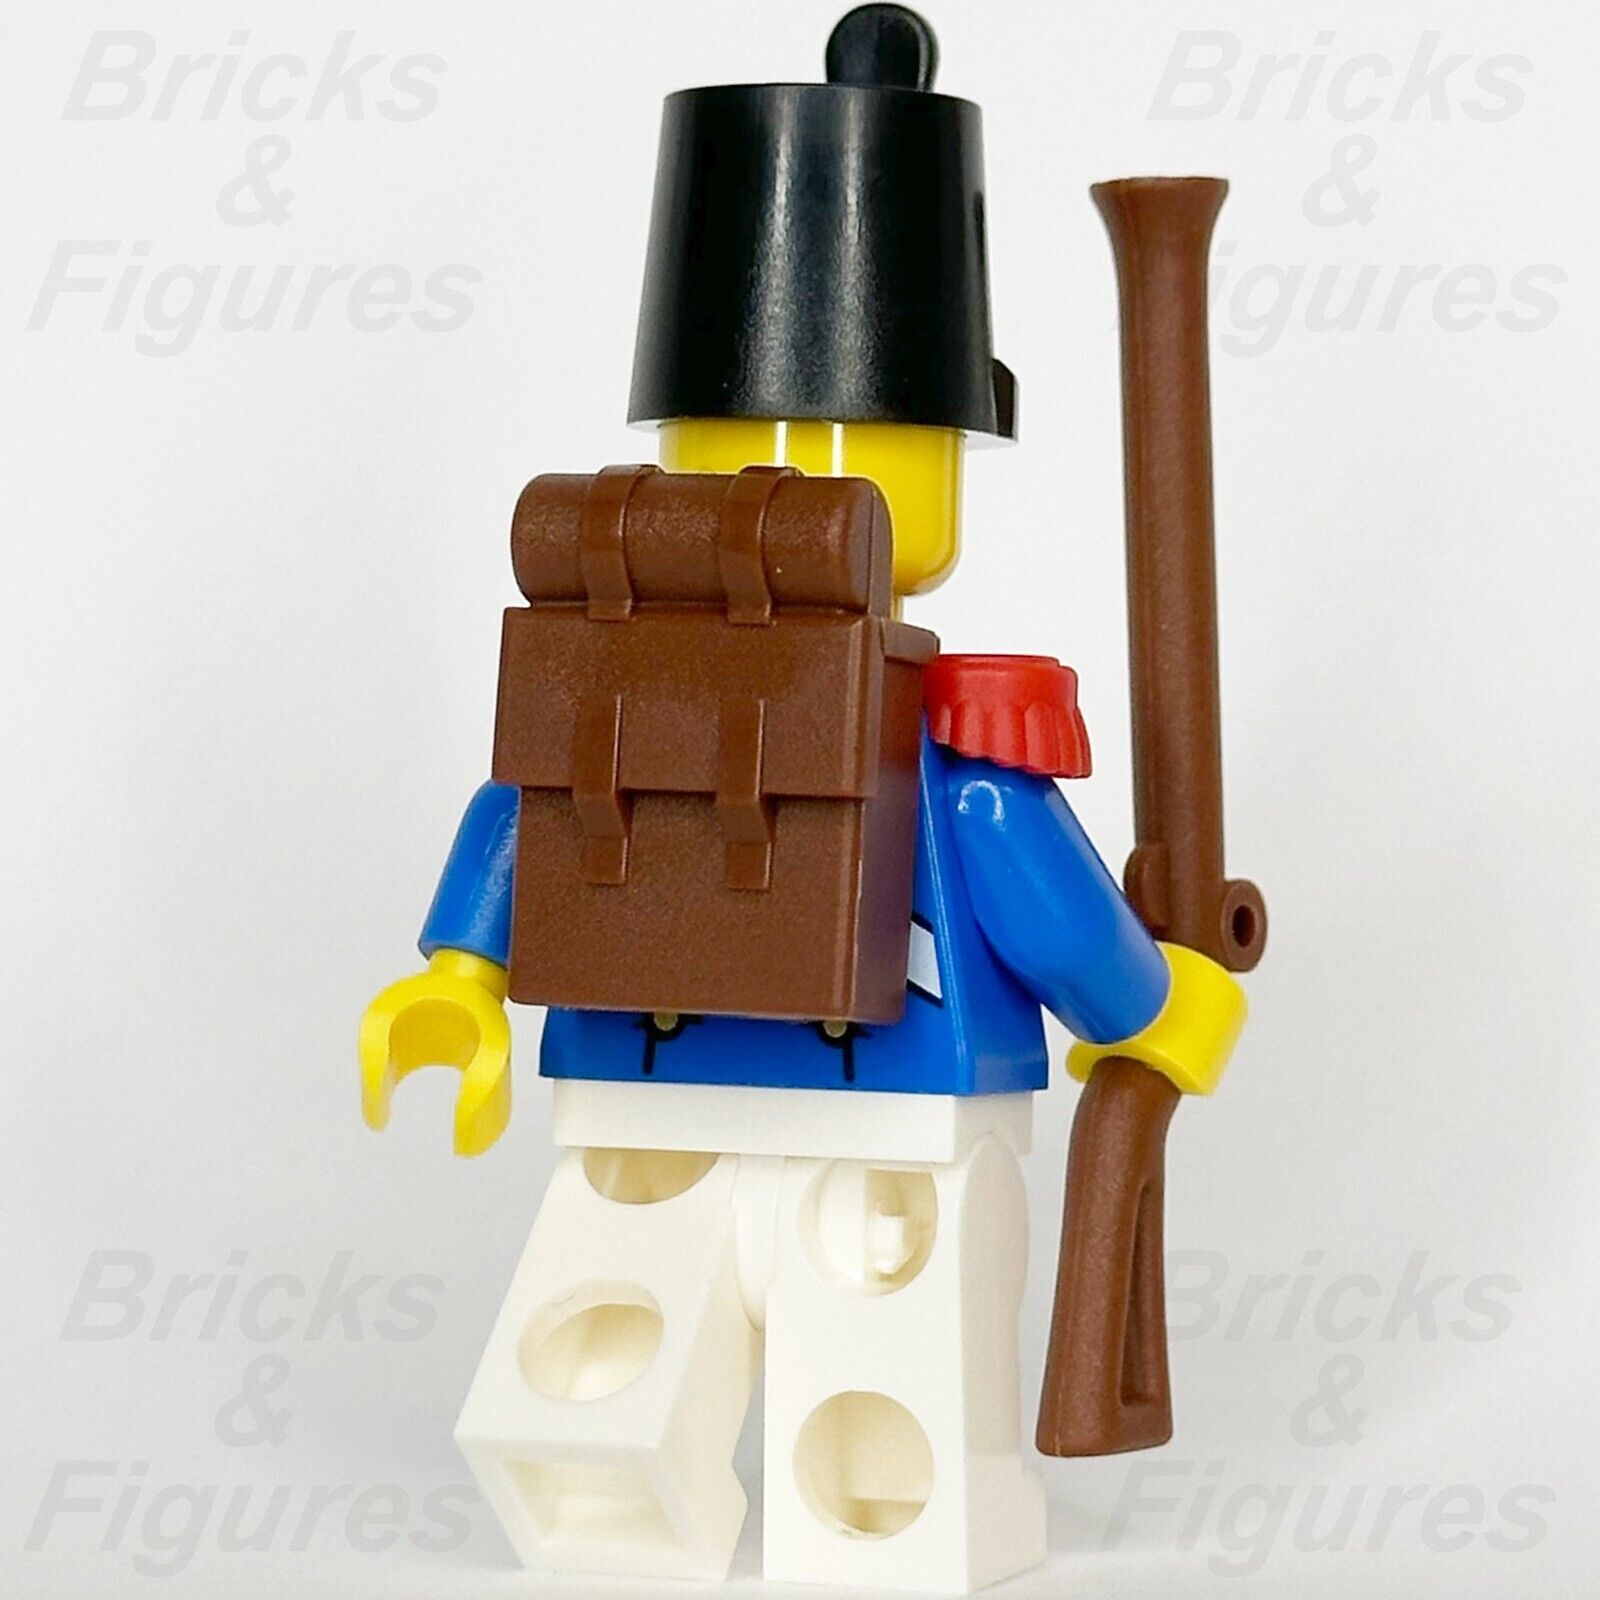 LEGO Pirates Imperial Soldier IV Minifigure Soldiers Female Musket 10320 pi192 - Bricks & Figures